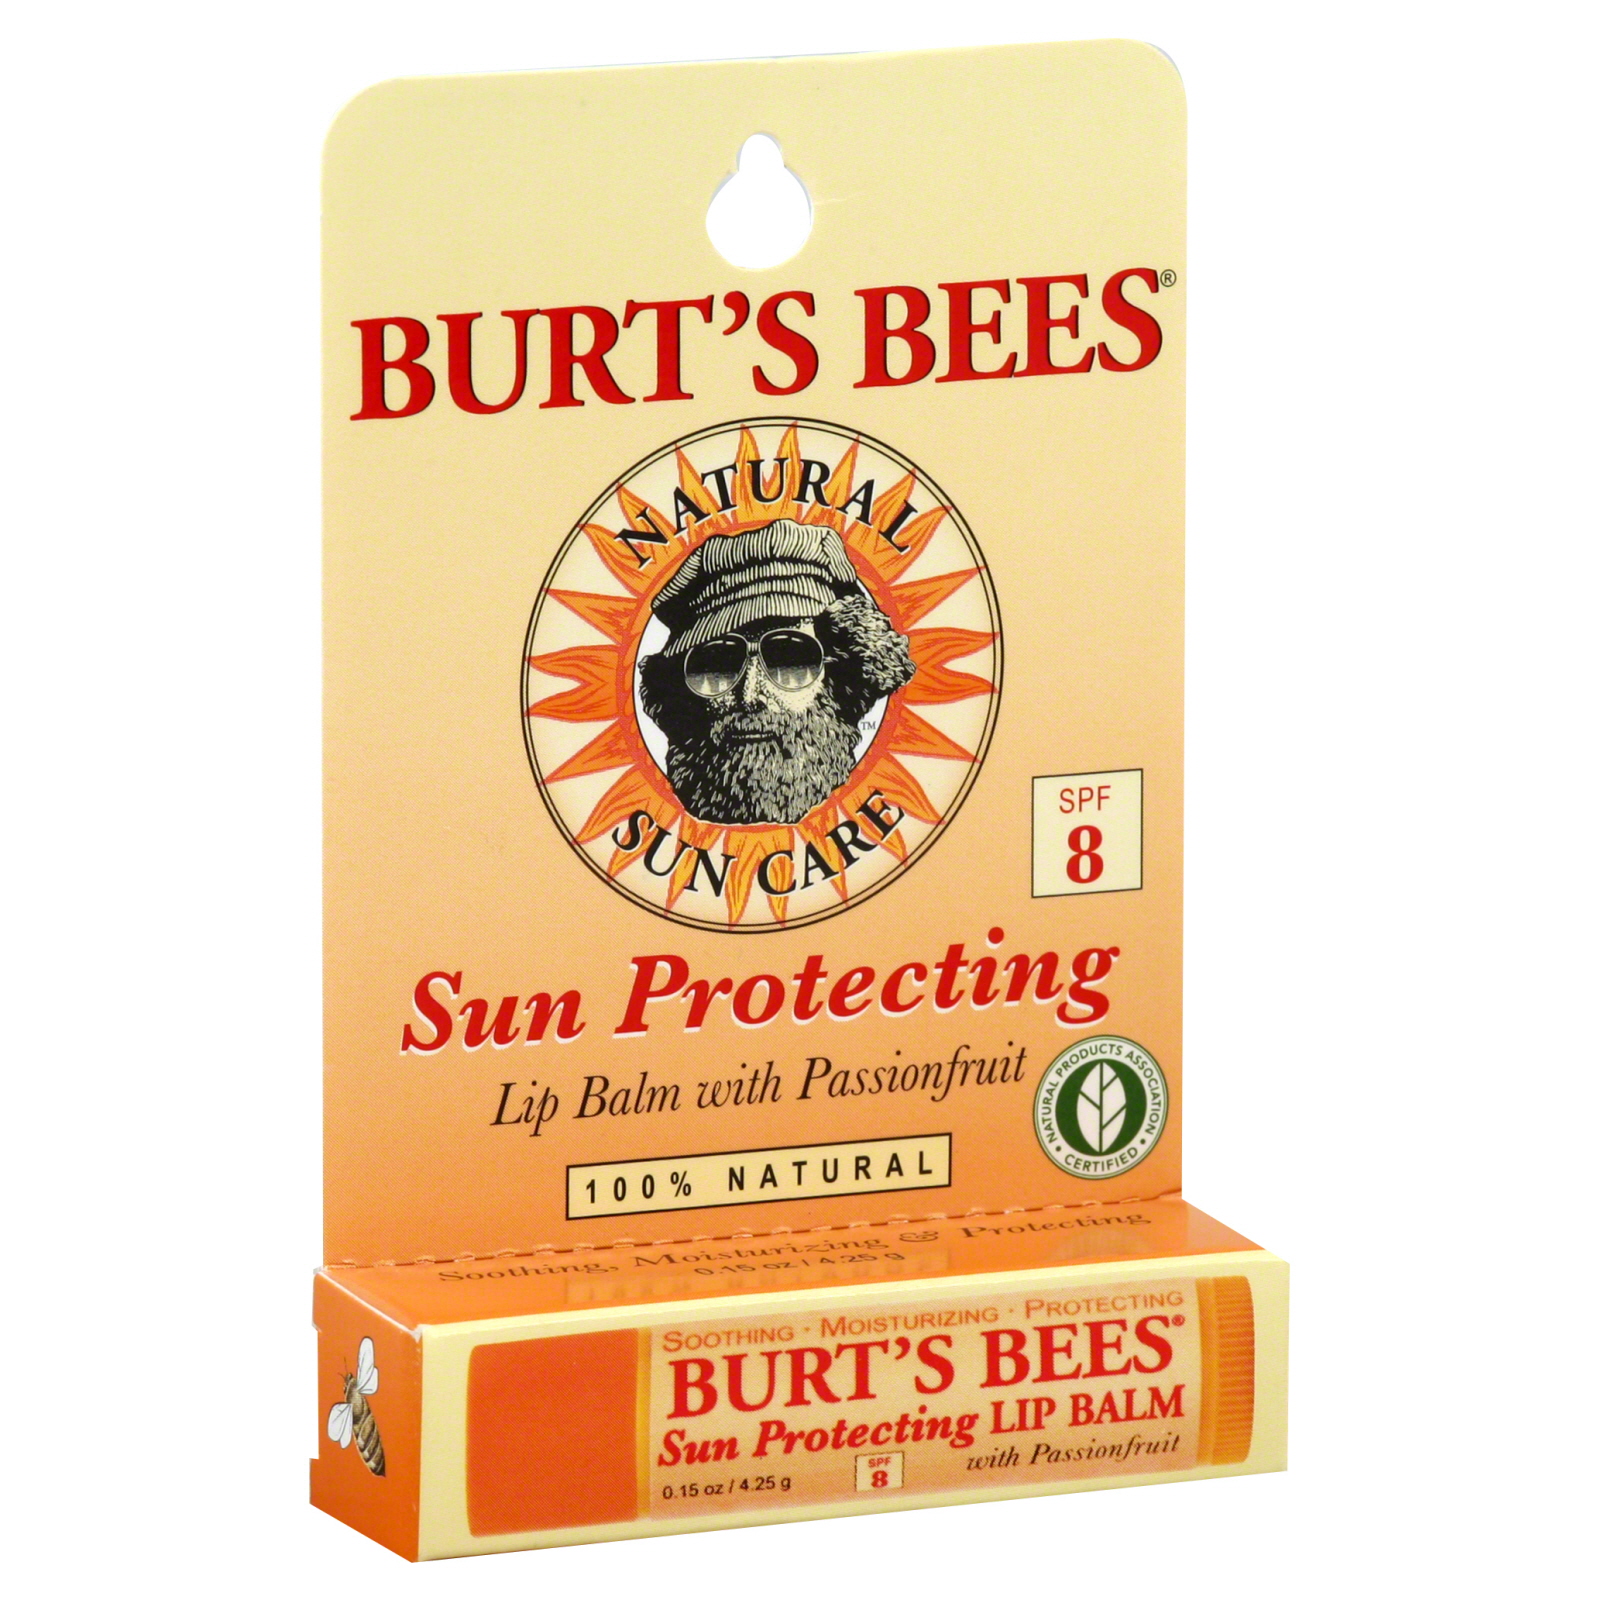 Burt's Bees Natural Sun Care Lip Balm, with Passionfruit, 0.15 oz (4.25 g)